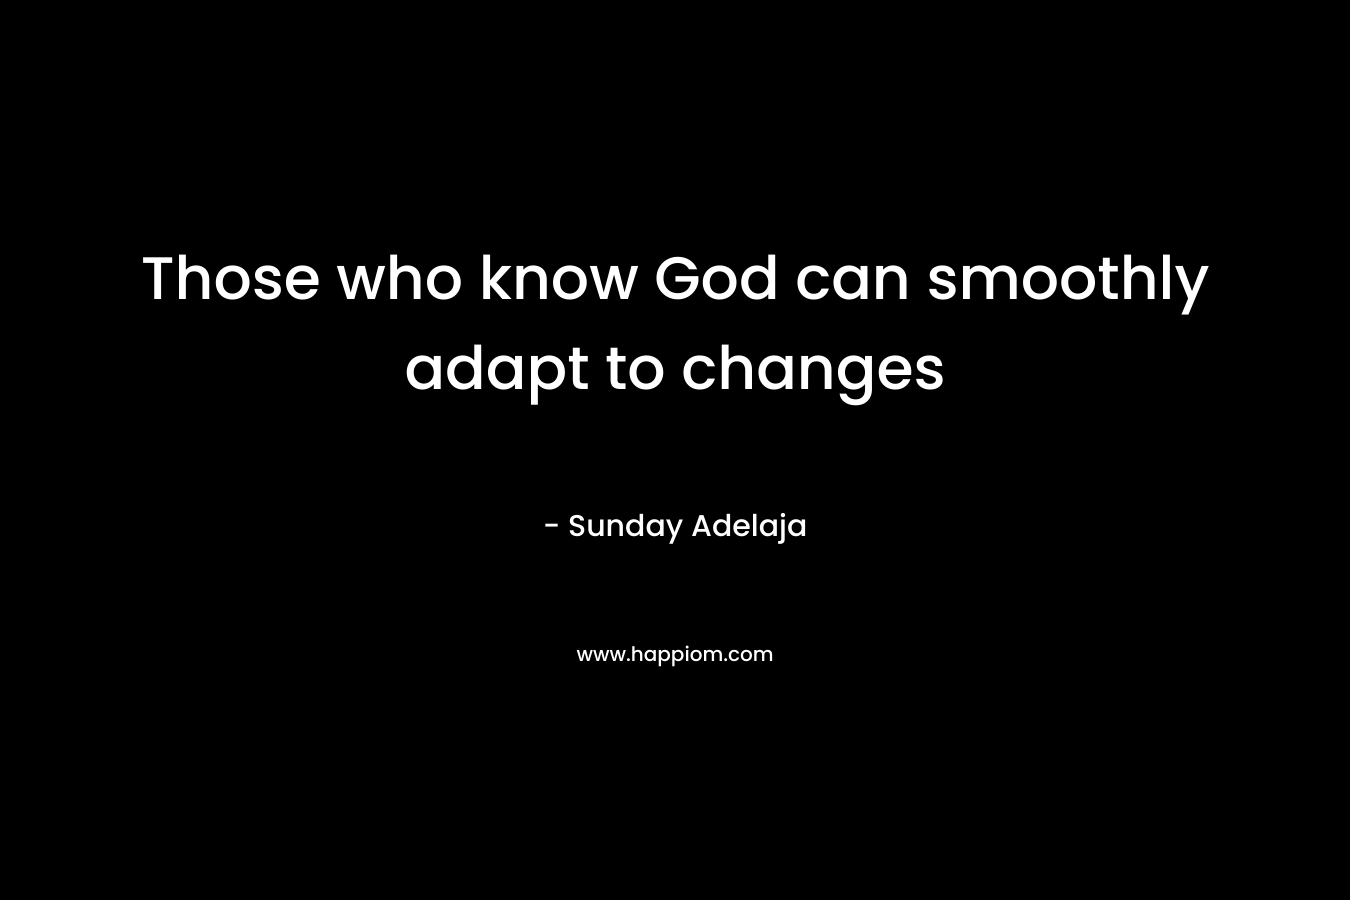 Those who know God can smoothly adapt to changes